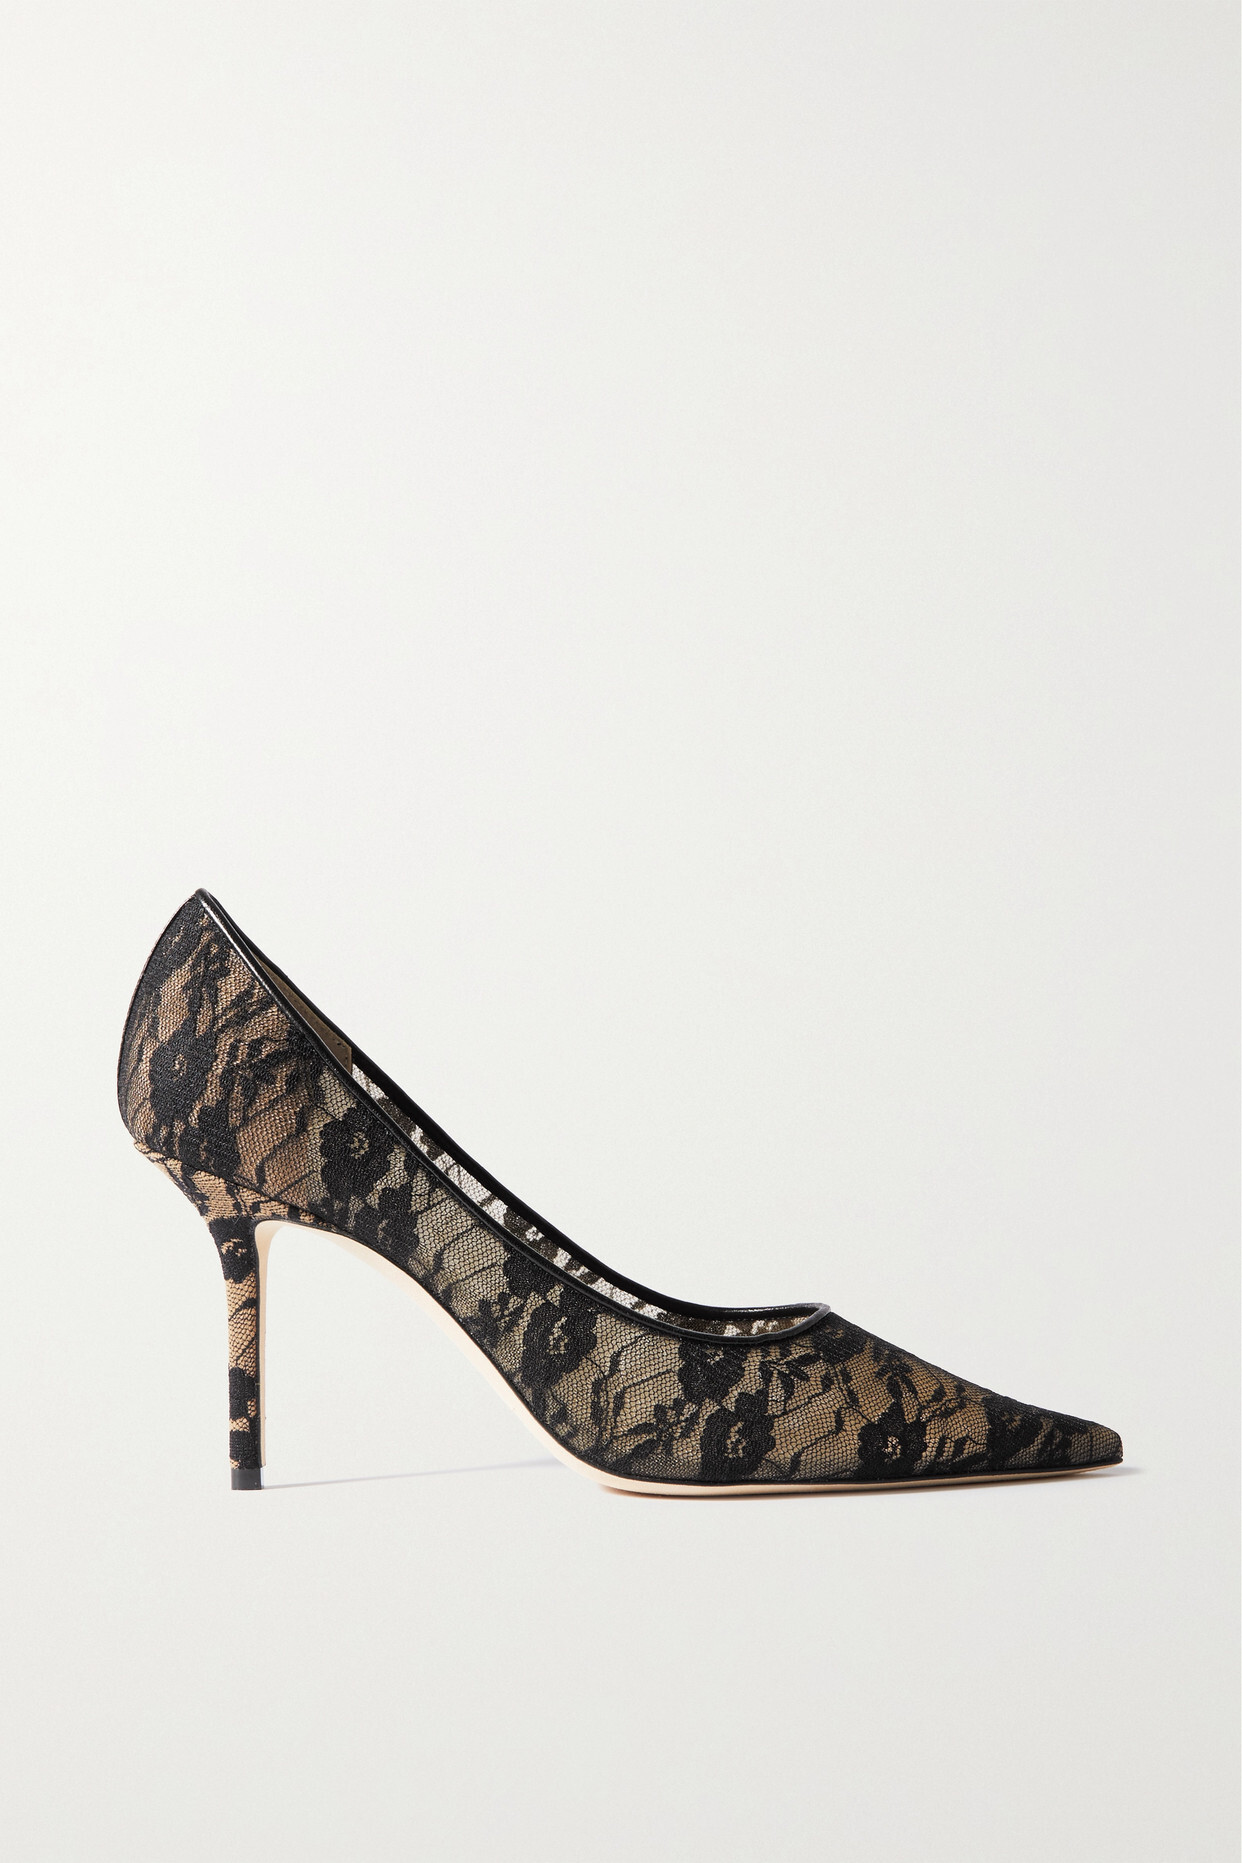 Jimmy Choo - Love 85 Leather-trimmed Lace Pumps - Black